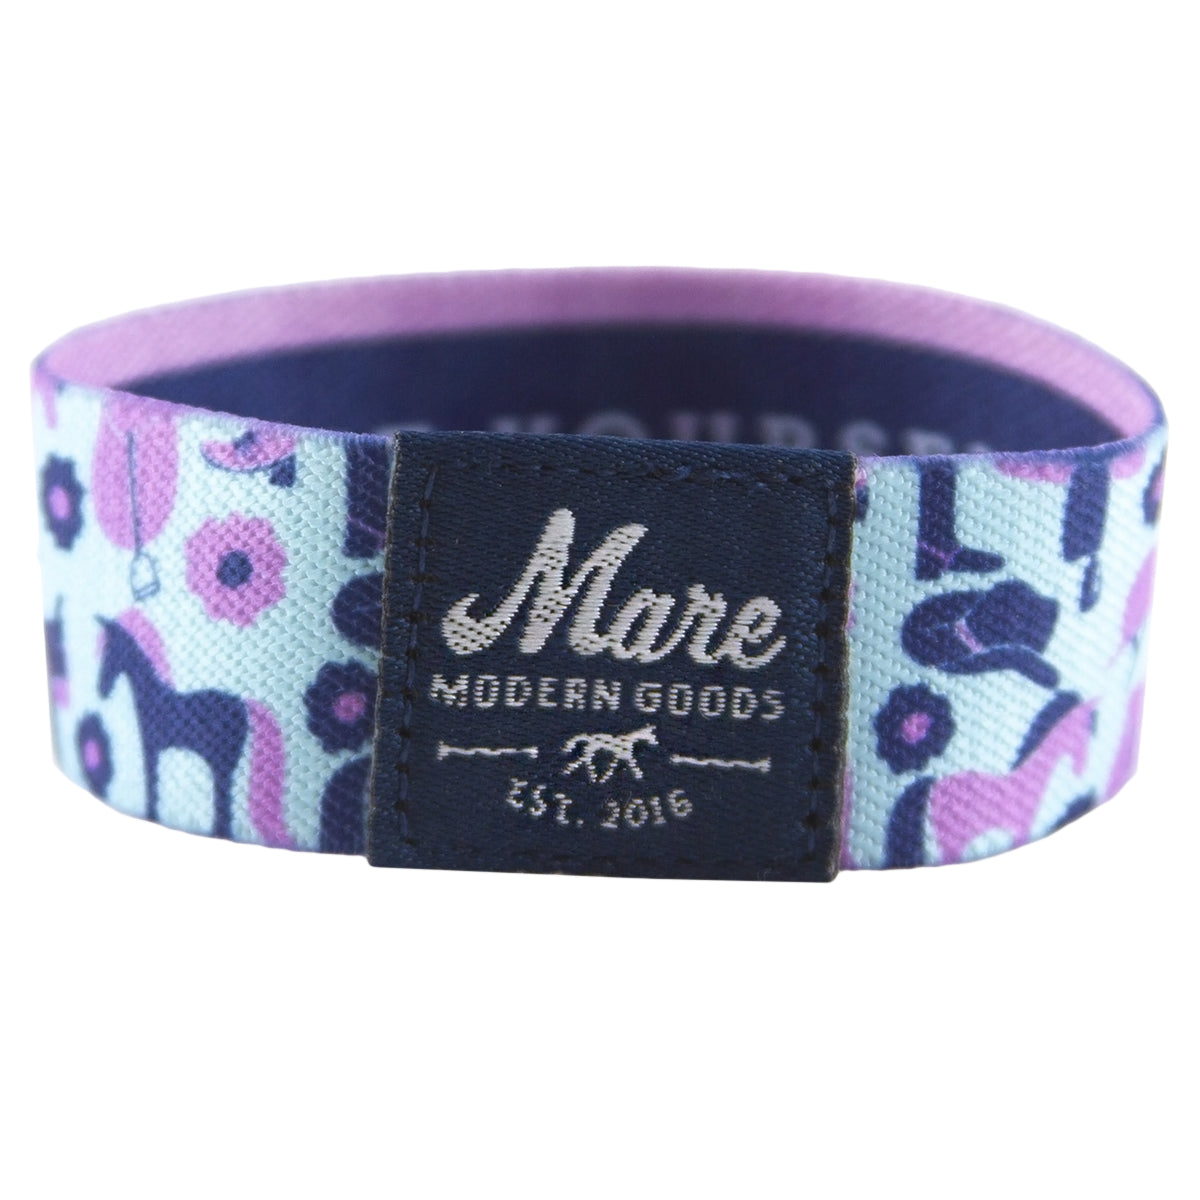 Mare Modern Goods Mindfilly Band